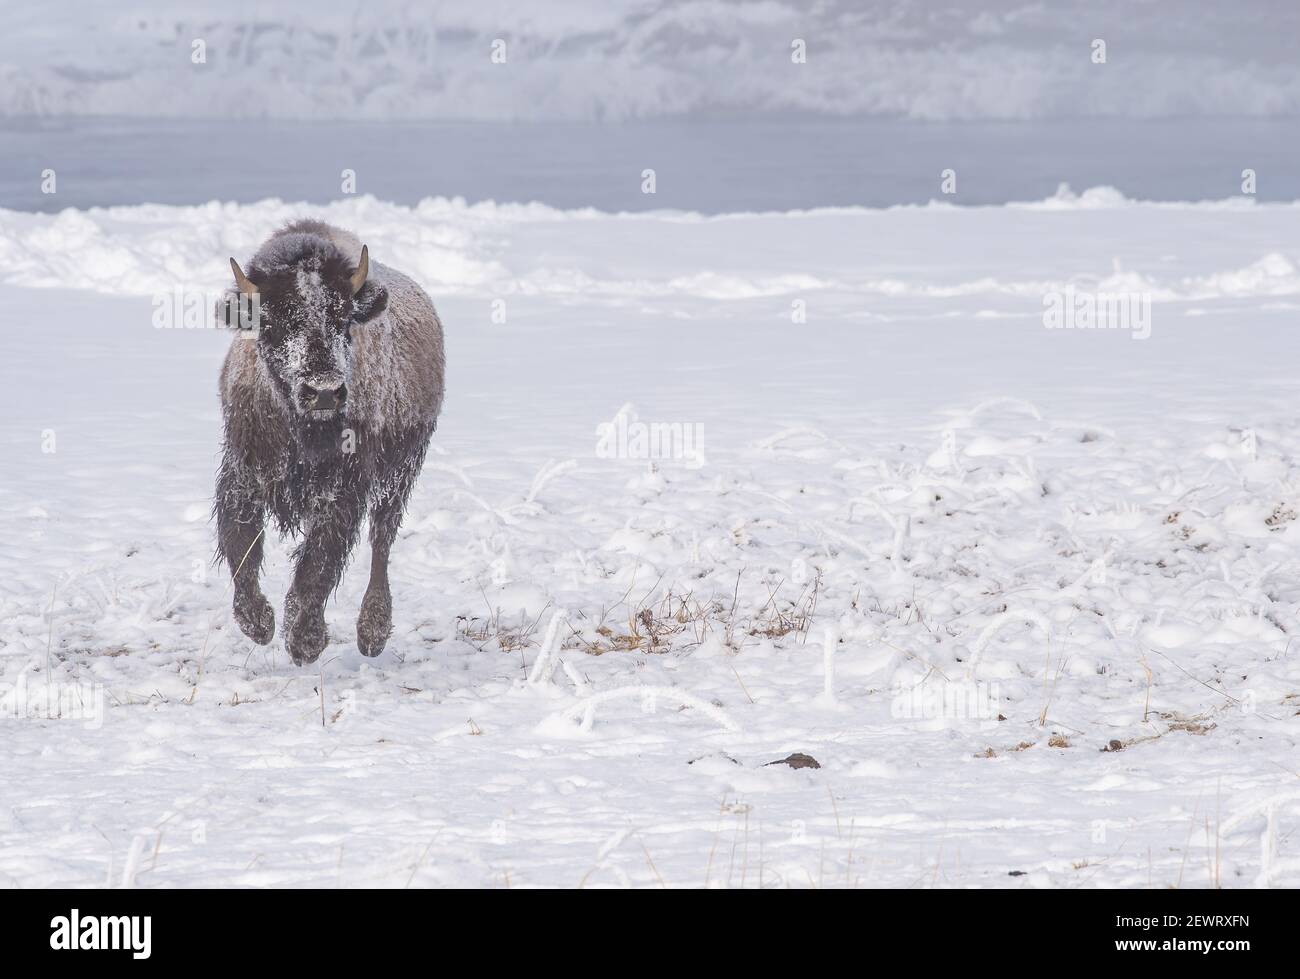 Frozen bison (Bison bison), running across snow, Yellowstone National Park, UNESCO World Heritage Site, Wyoming, United States of America Stock Photo